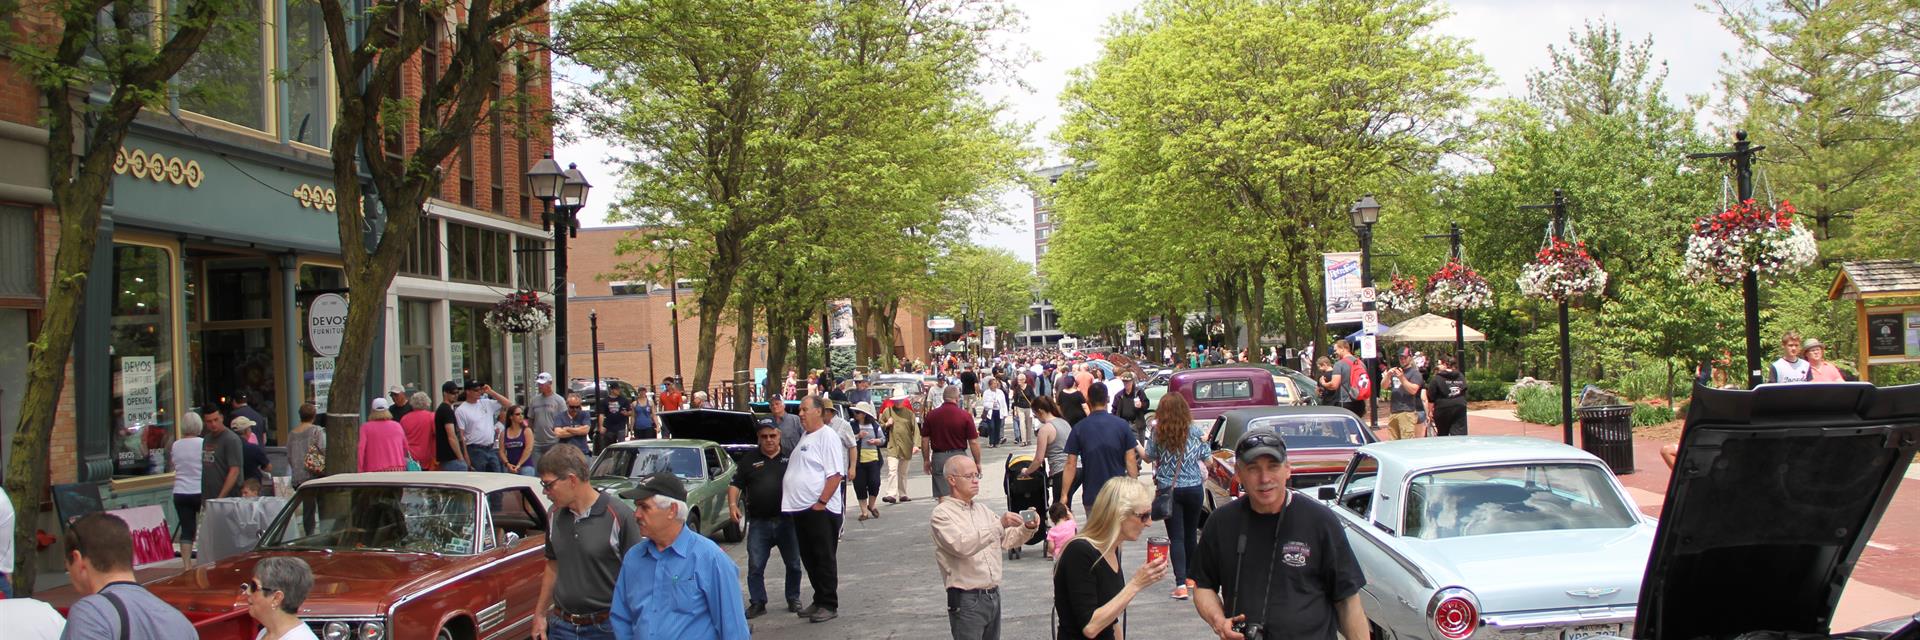 large crowd at a festival in downtown chatham